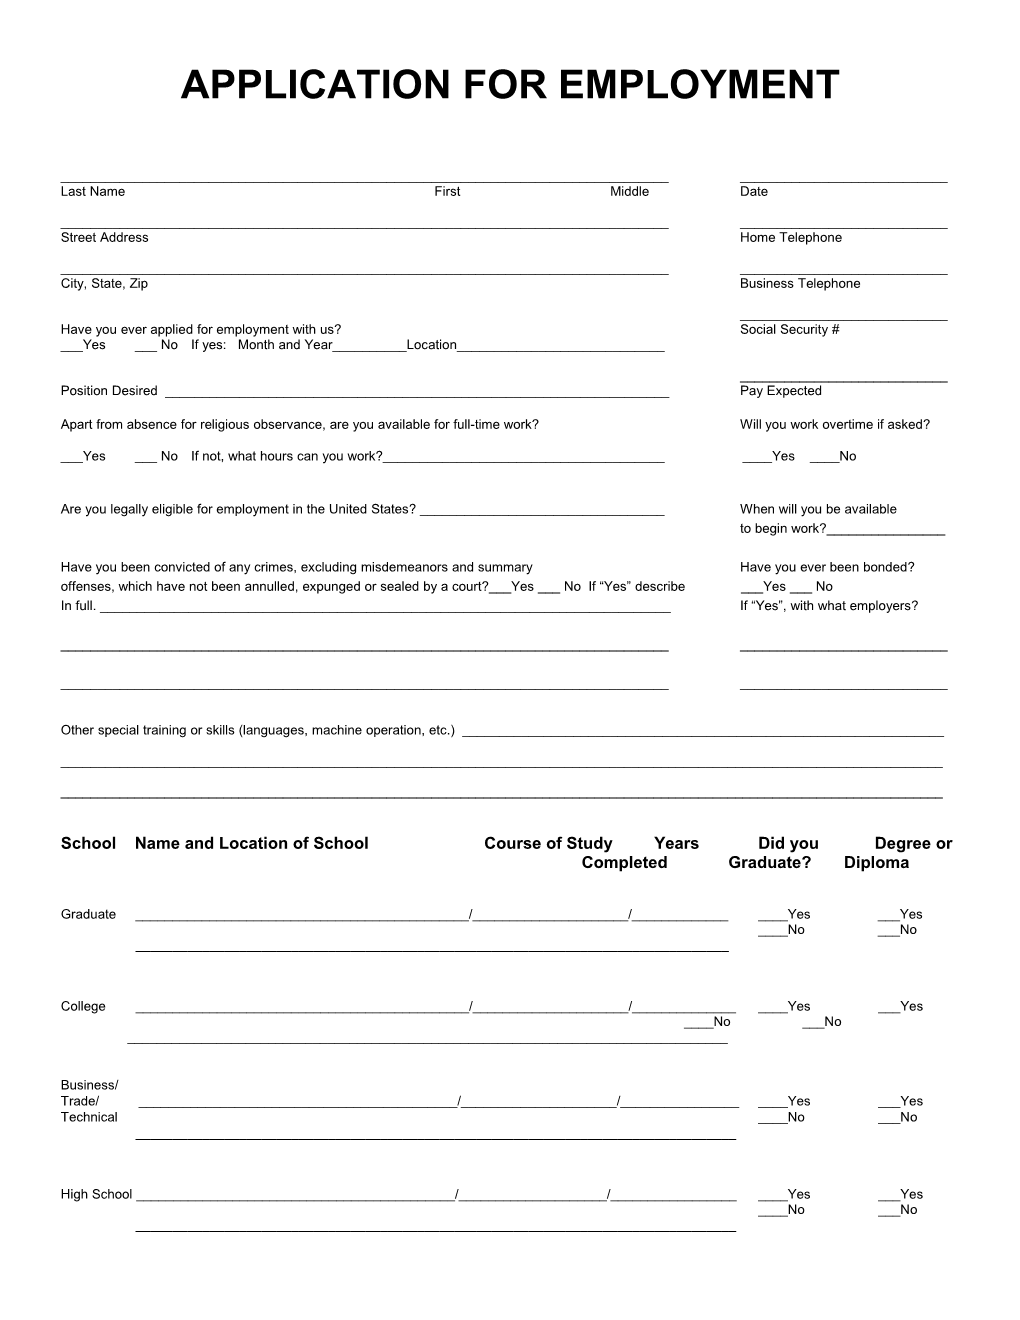 Application for Employment s72